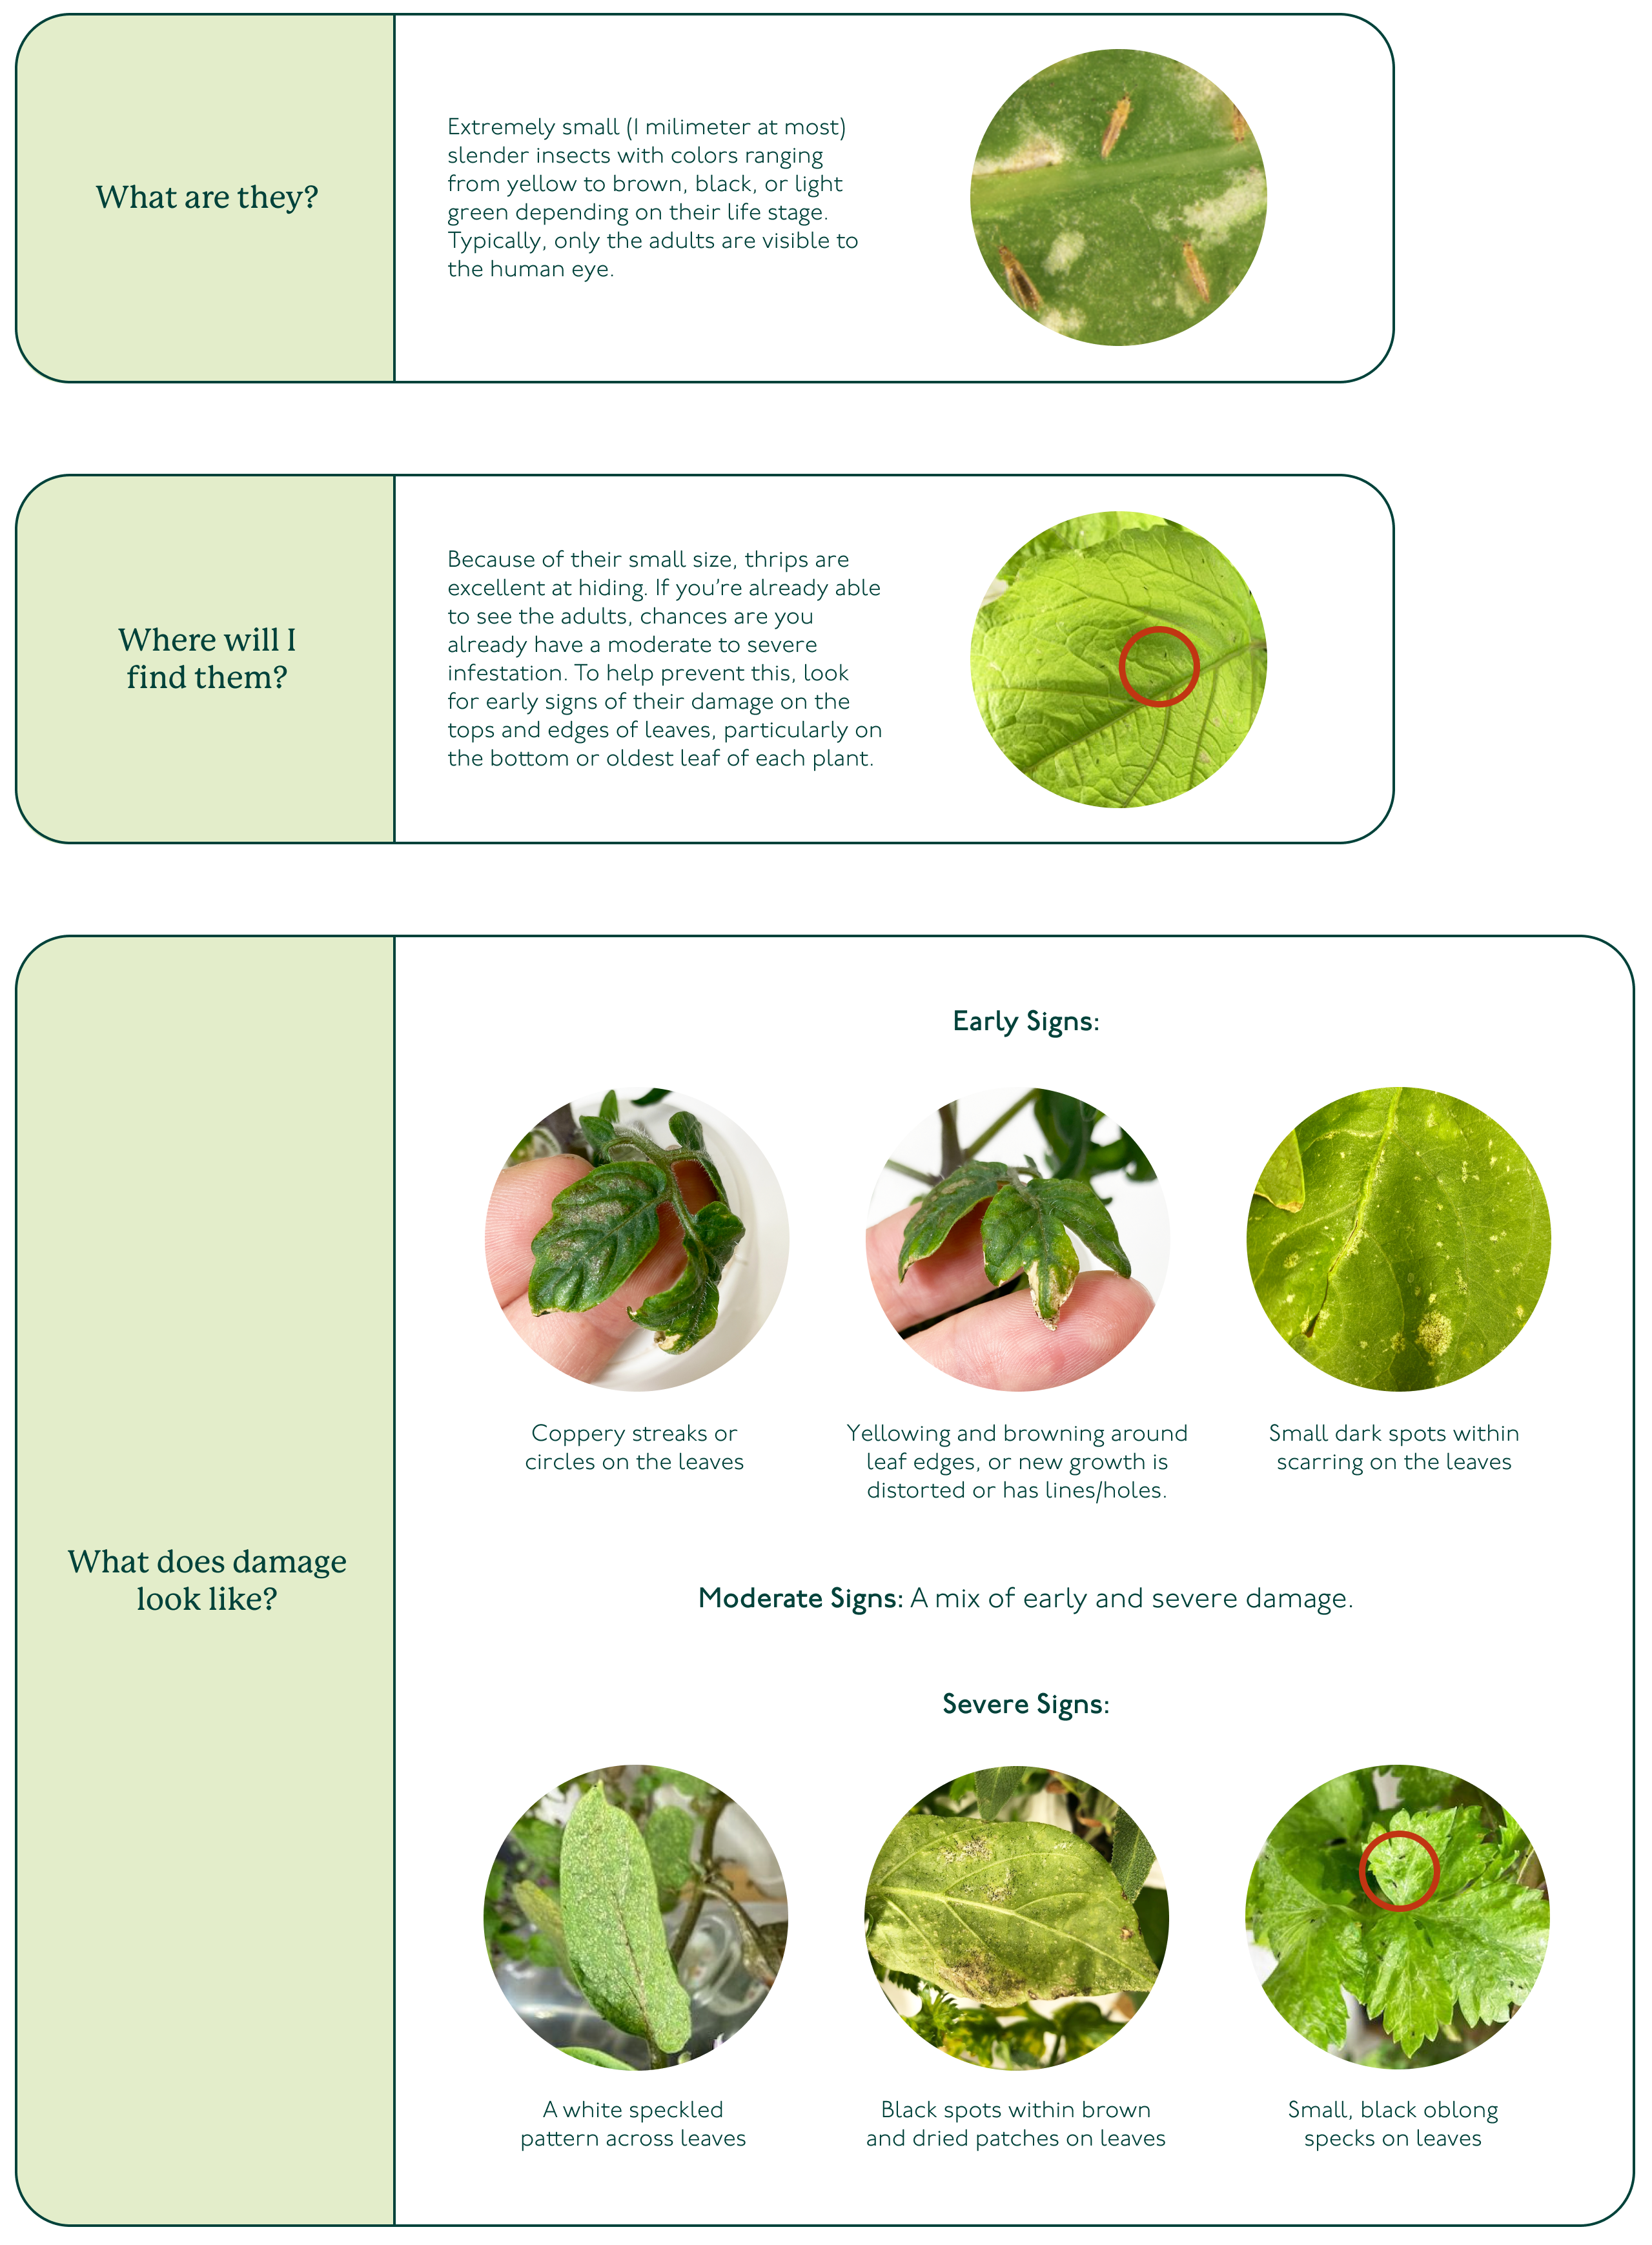 Thrips_-_Pest_ID___Early_Signs_of_Damage.png